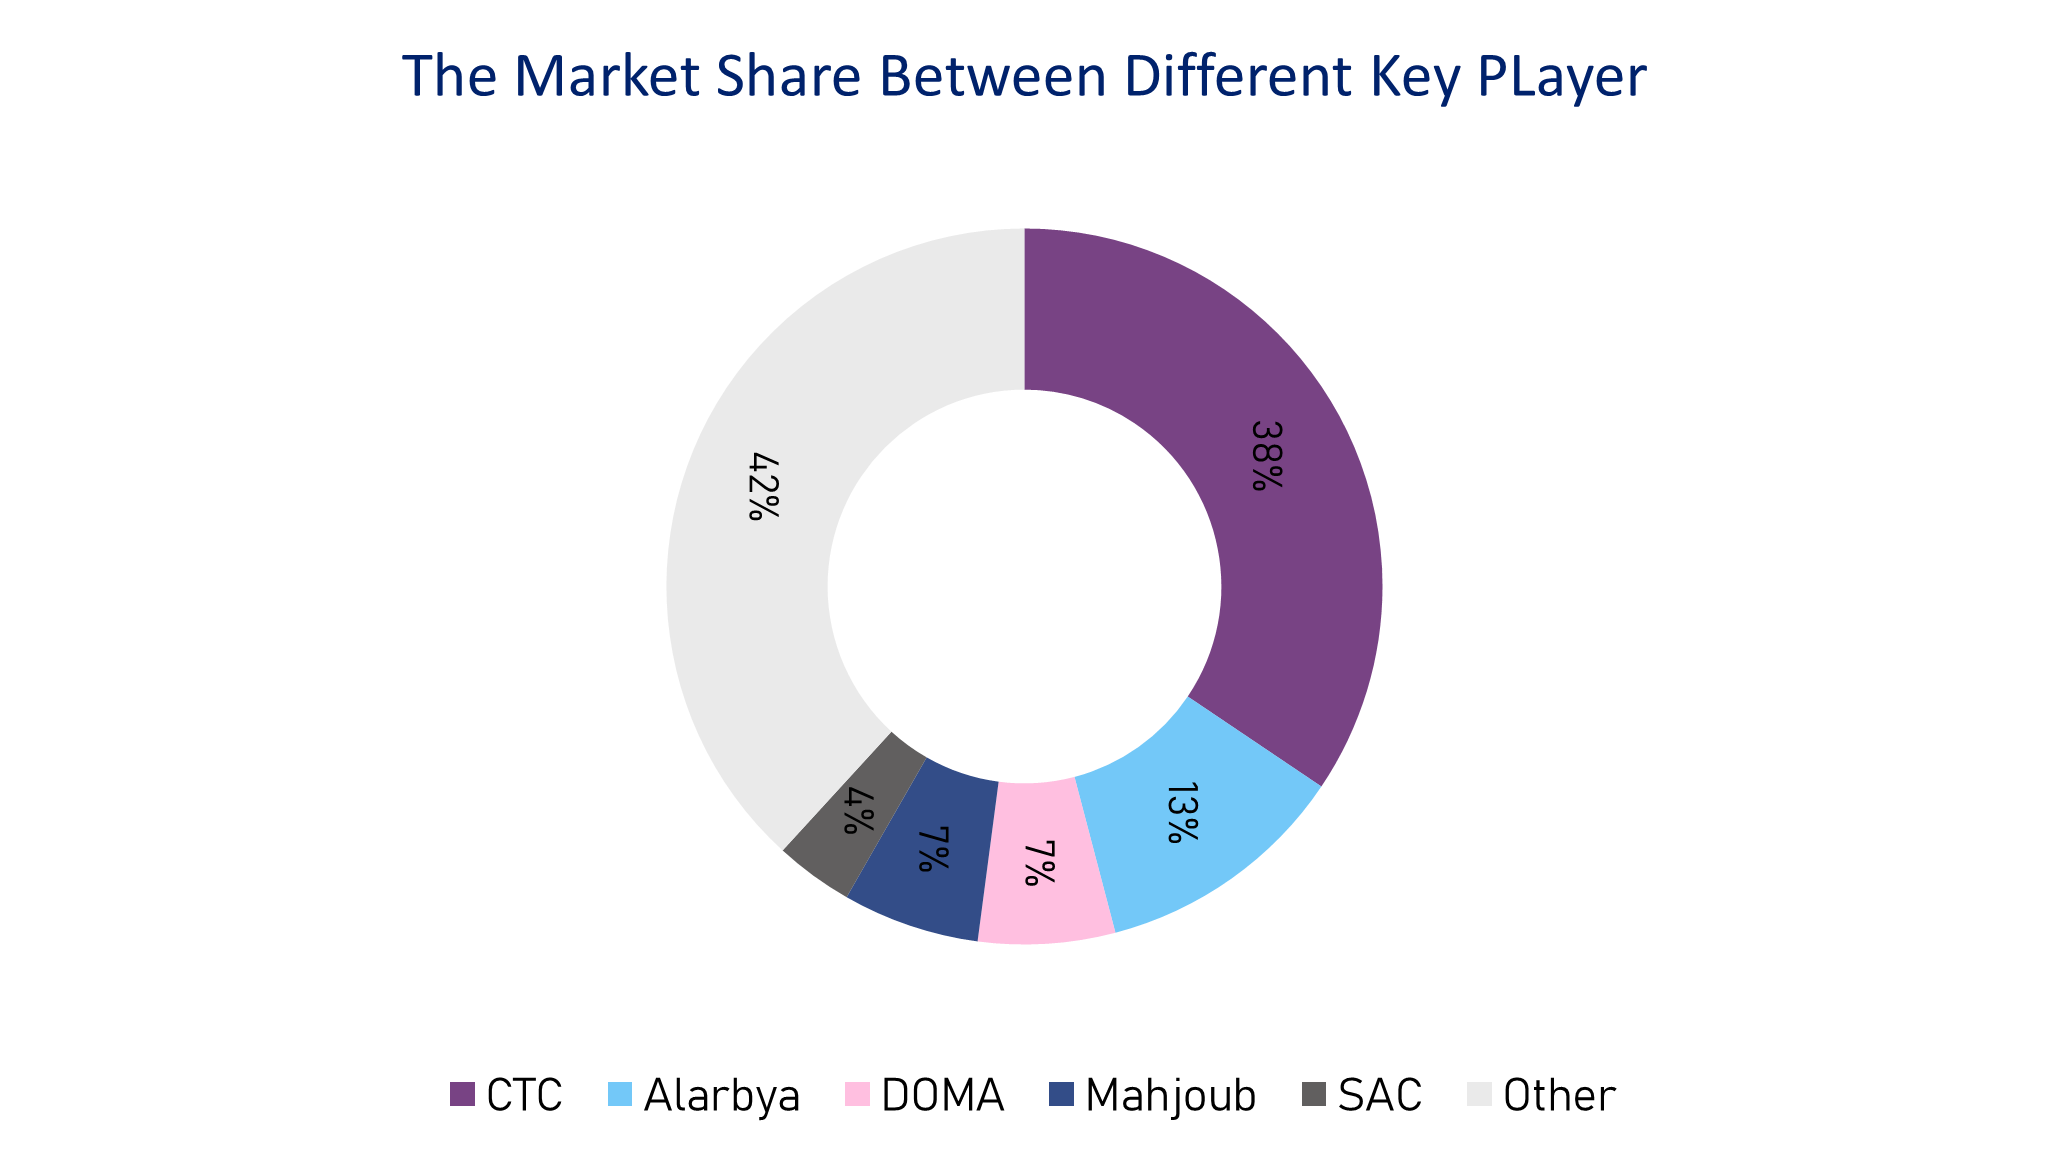 The main key players' shares